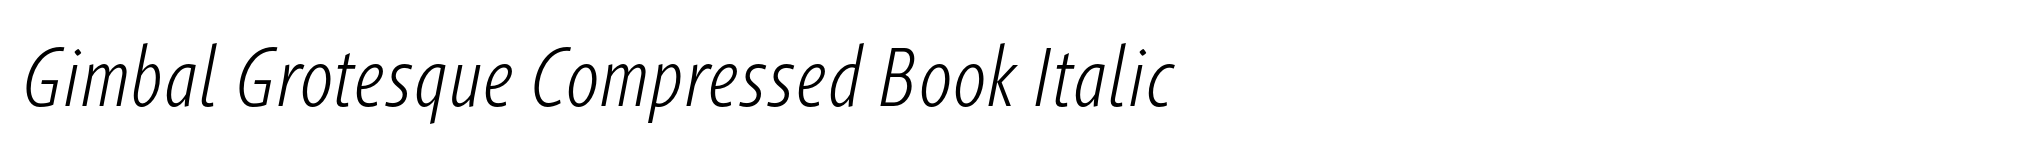 Gimbal Grotesque Compressed Book Italic image